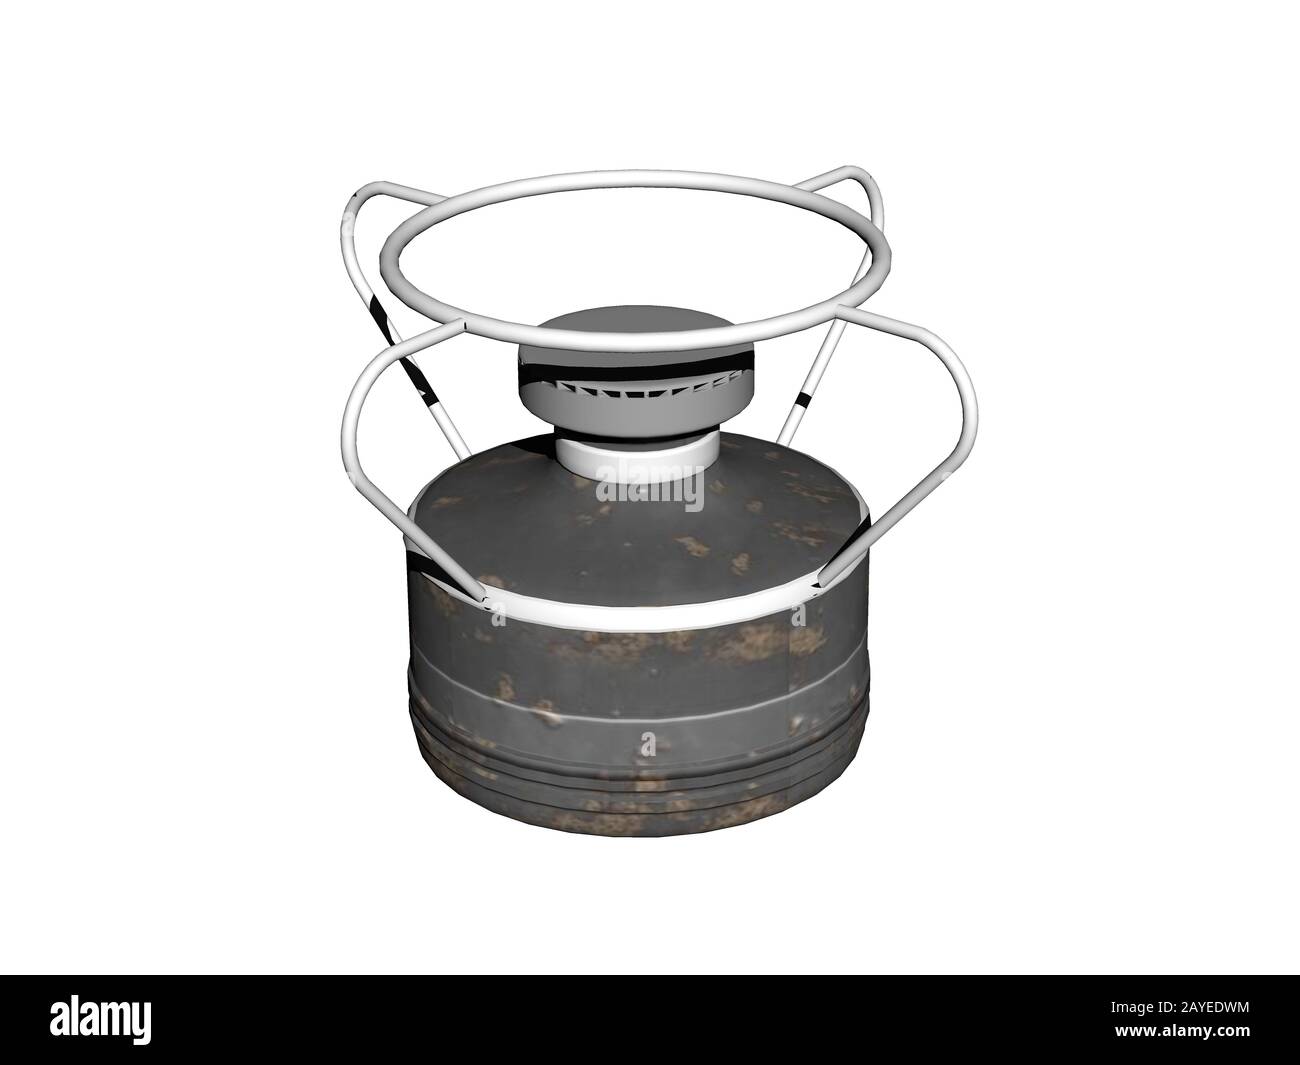 Camping stove with attachment Stock Photo